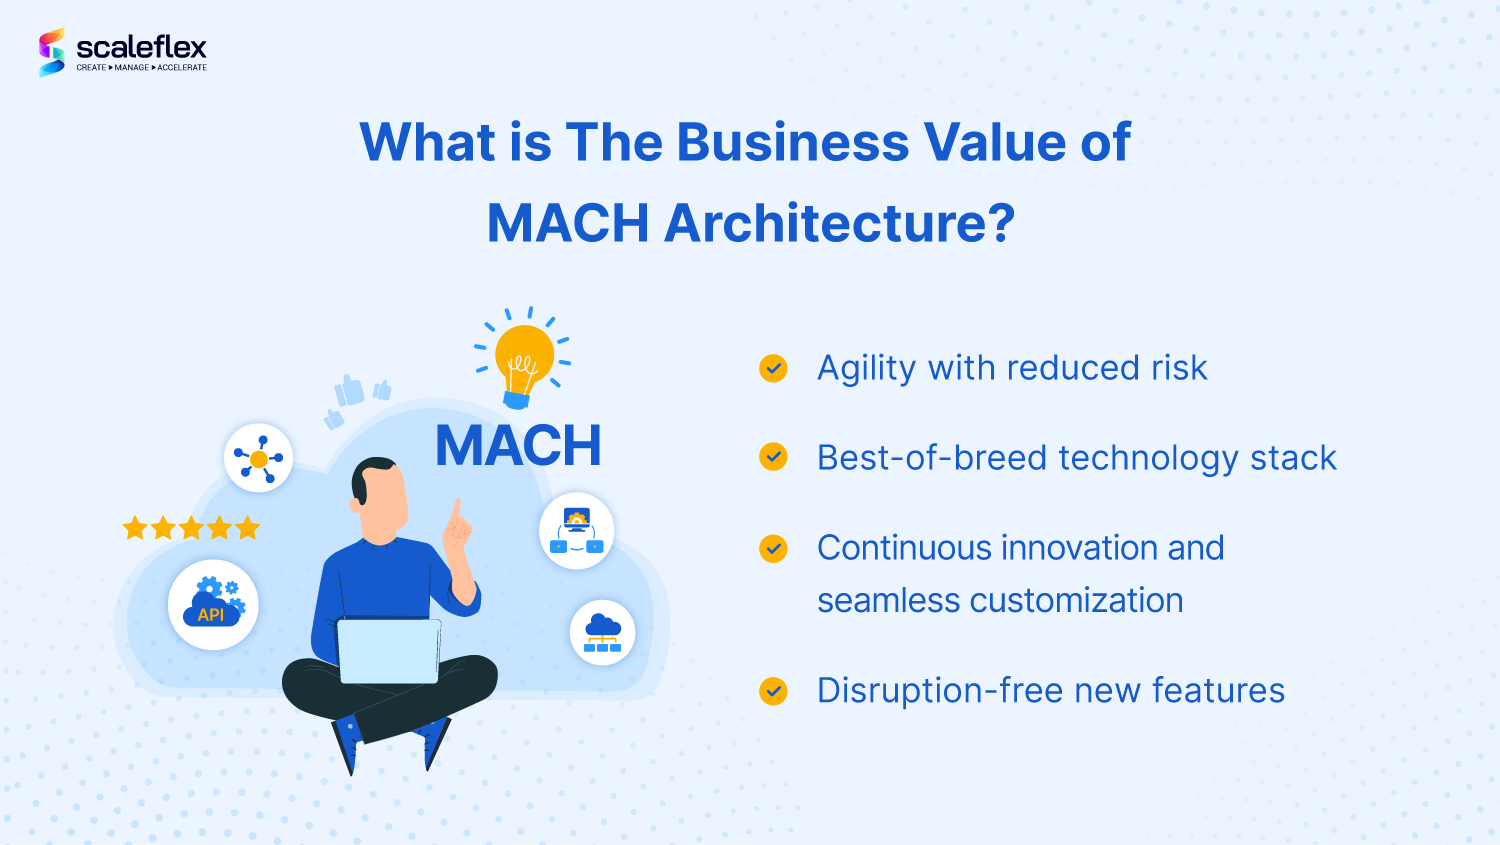 Business benefits of MACH architecture